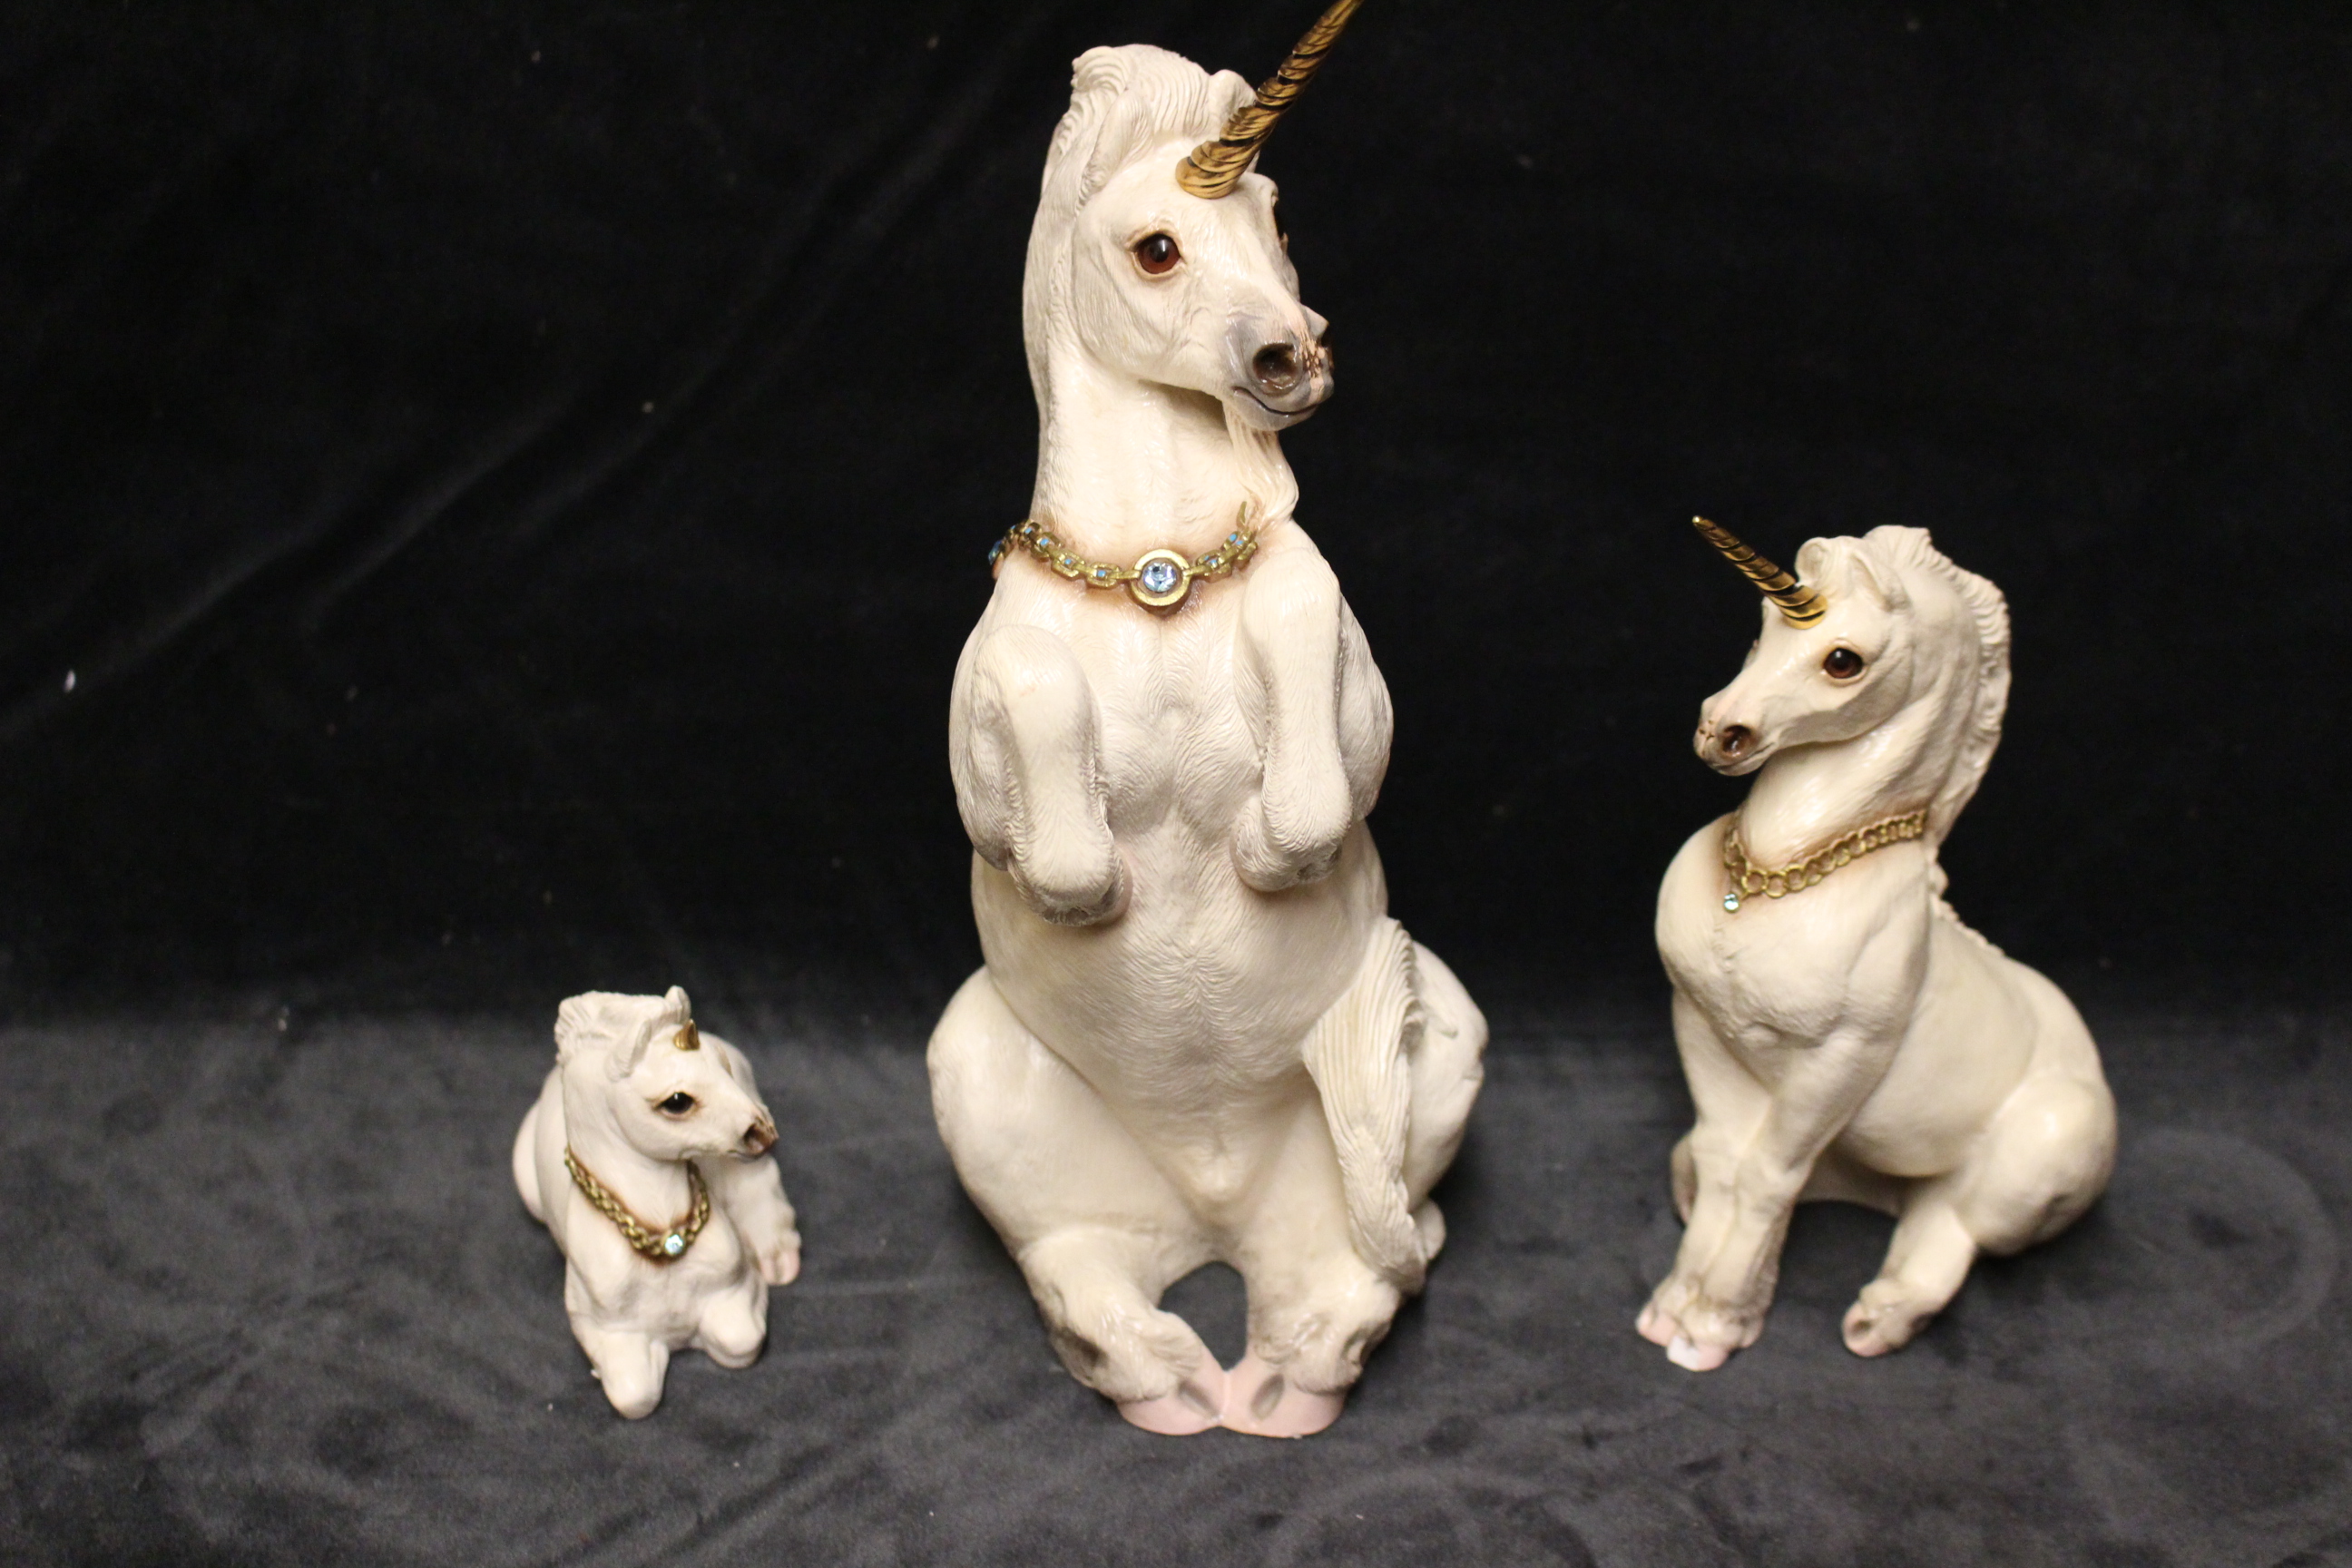 Three Windstone Editions resin unicorns in sizes, tallest 25.5cm high, smallest 7.5cm high a - Image 2 of 4